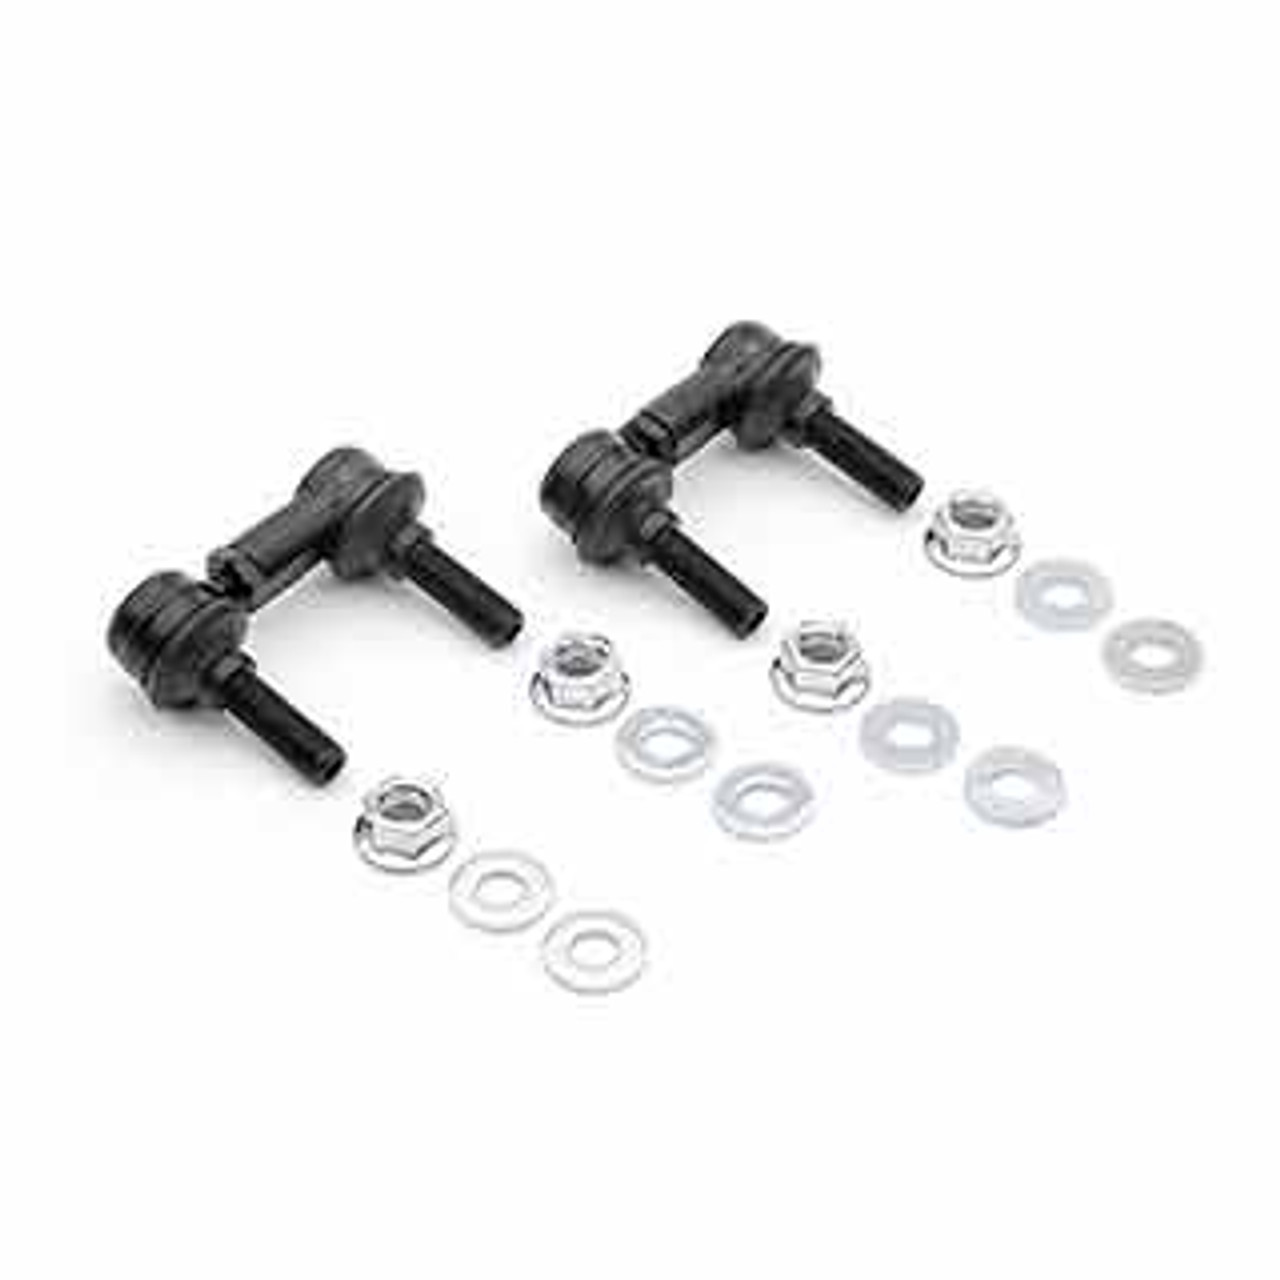 SUBARU DAILY DRIVER SUSPENSION PACKAGE - FRONT SWAY BAR LINK KIT - HEAVY DUTY ADJUSTABLE